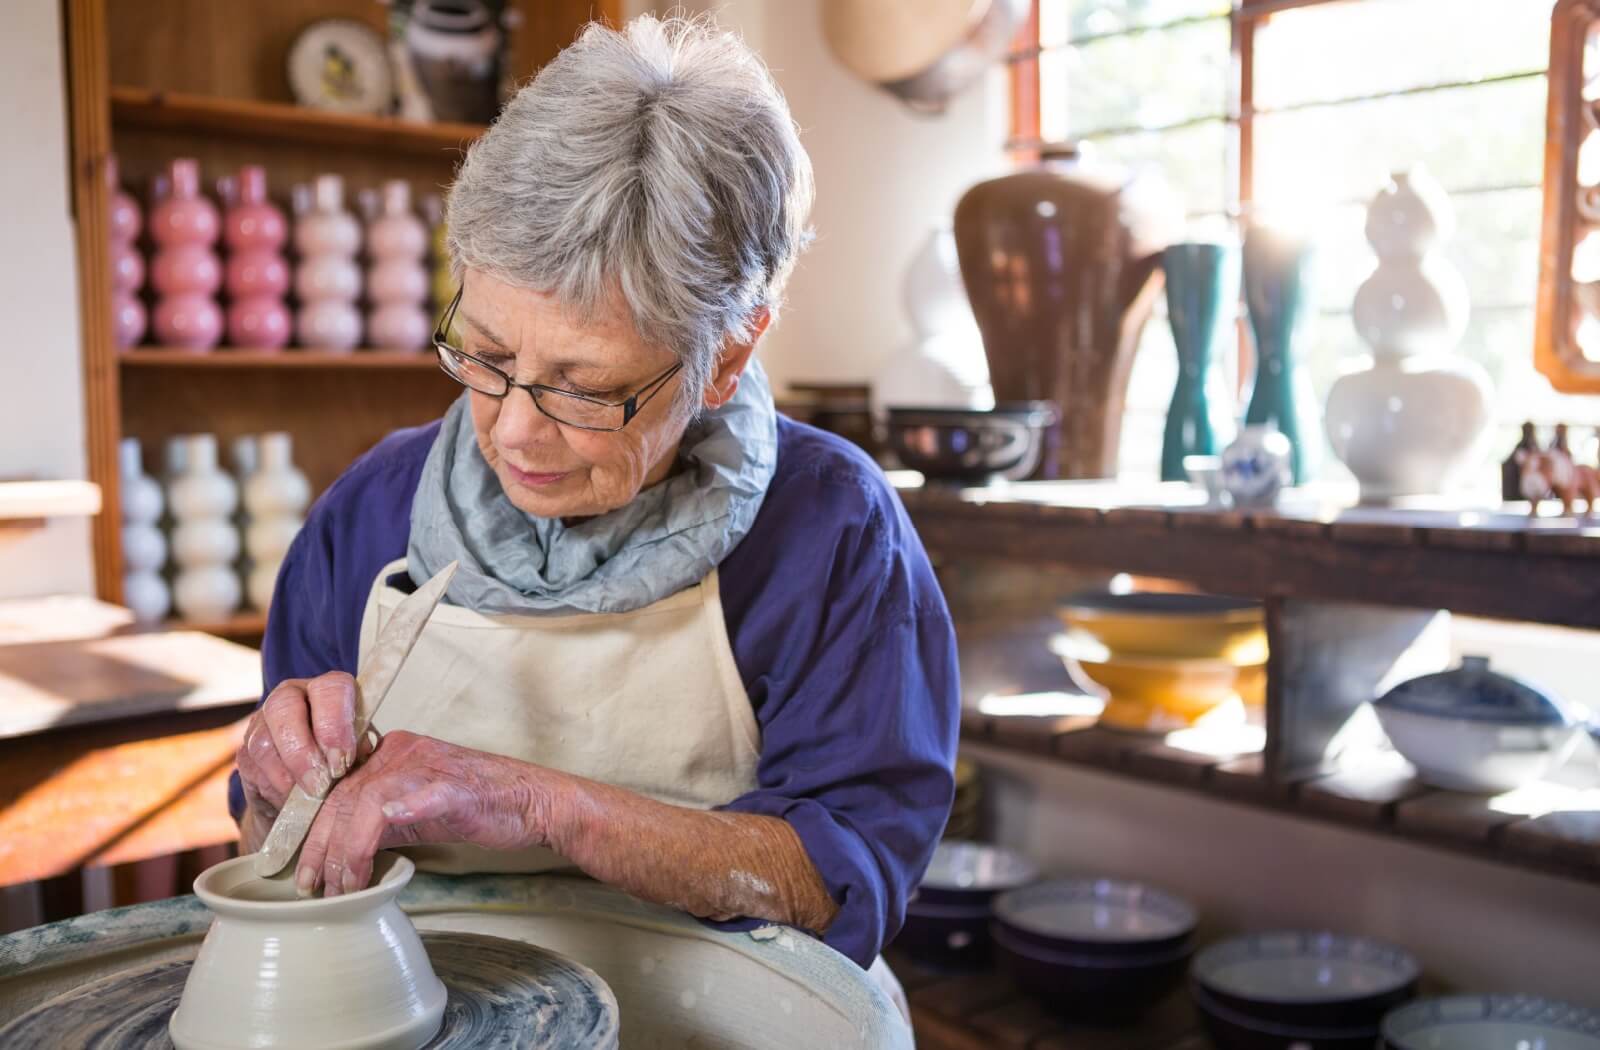 An older adult woman making a pot for her pottery class.